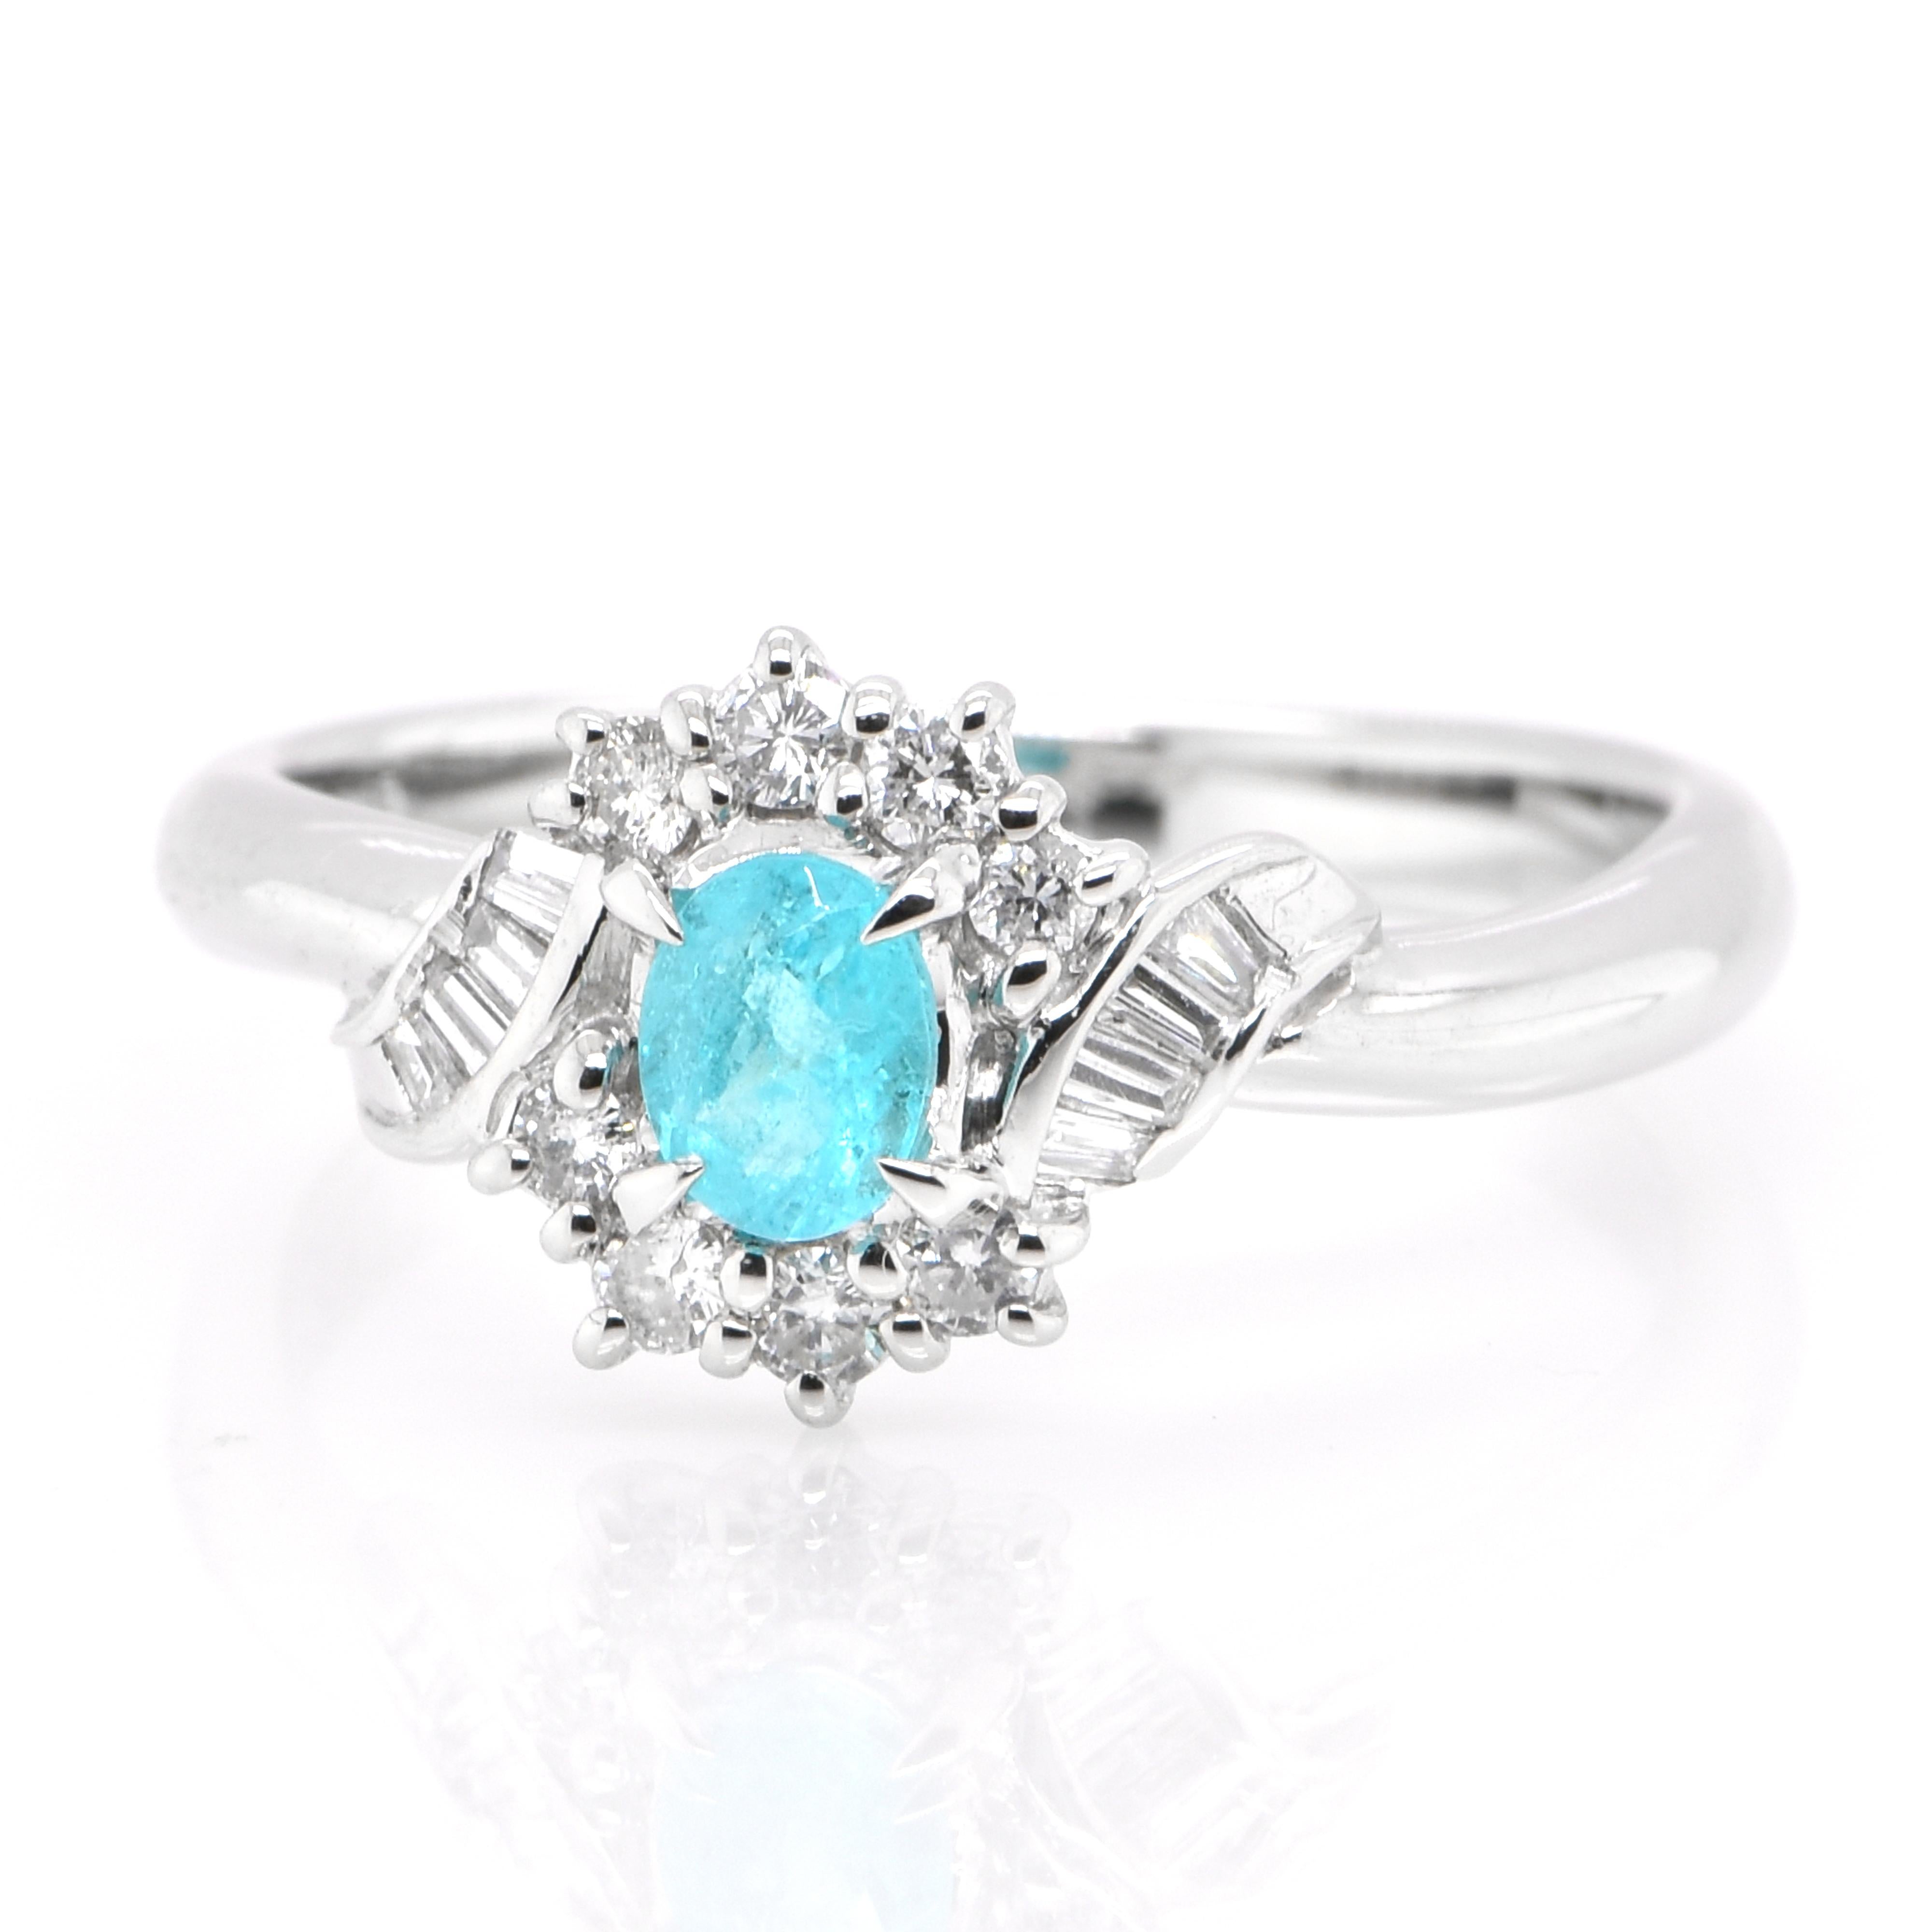 A beautiful ring featuring a 0.254 Carat Natural Brazilian Paraiba Tourmaline and 0.23 Carats of Diamond Accents set in Platinum. Paraiba Tourmalines were only discovered 30 years ago in the Brazilian state of the same name- Paraiba. Since then they